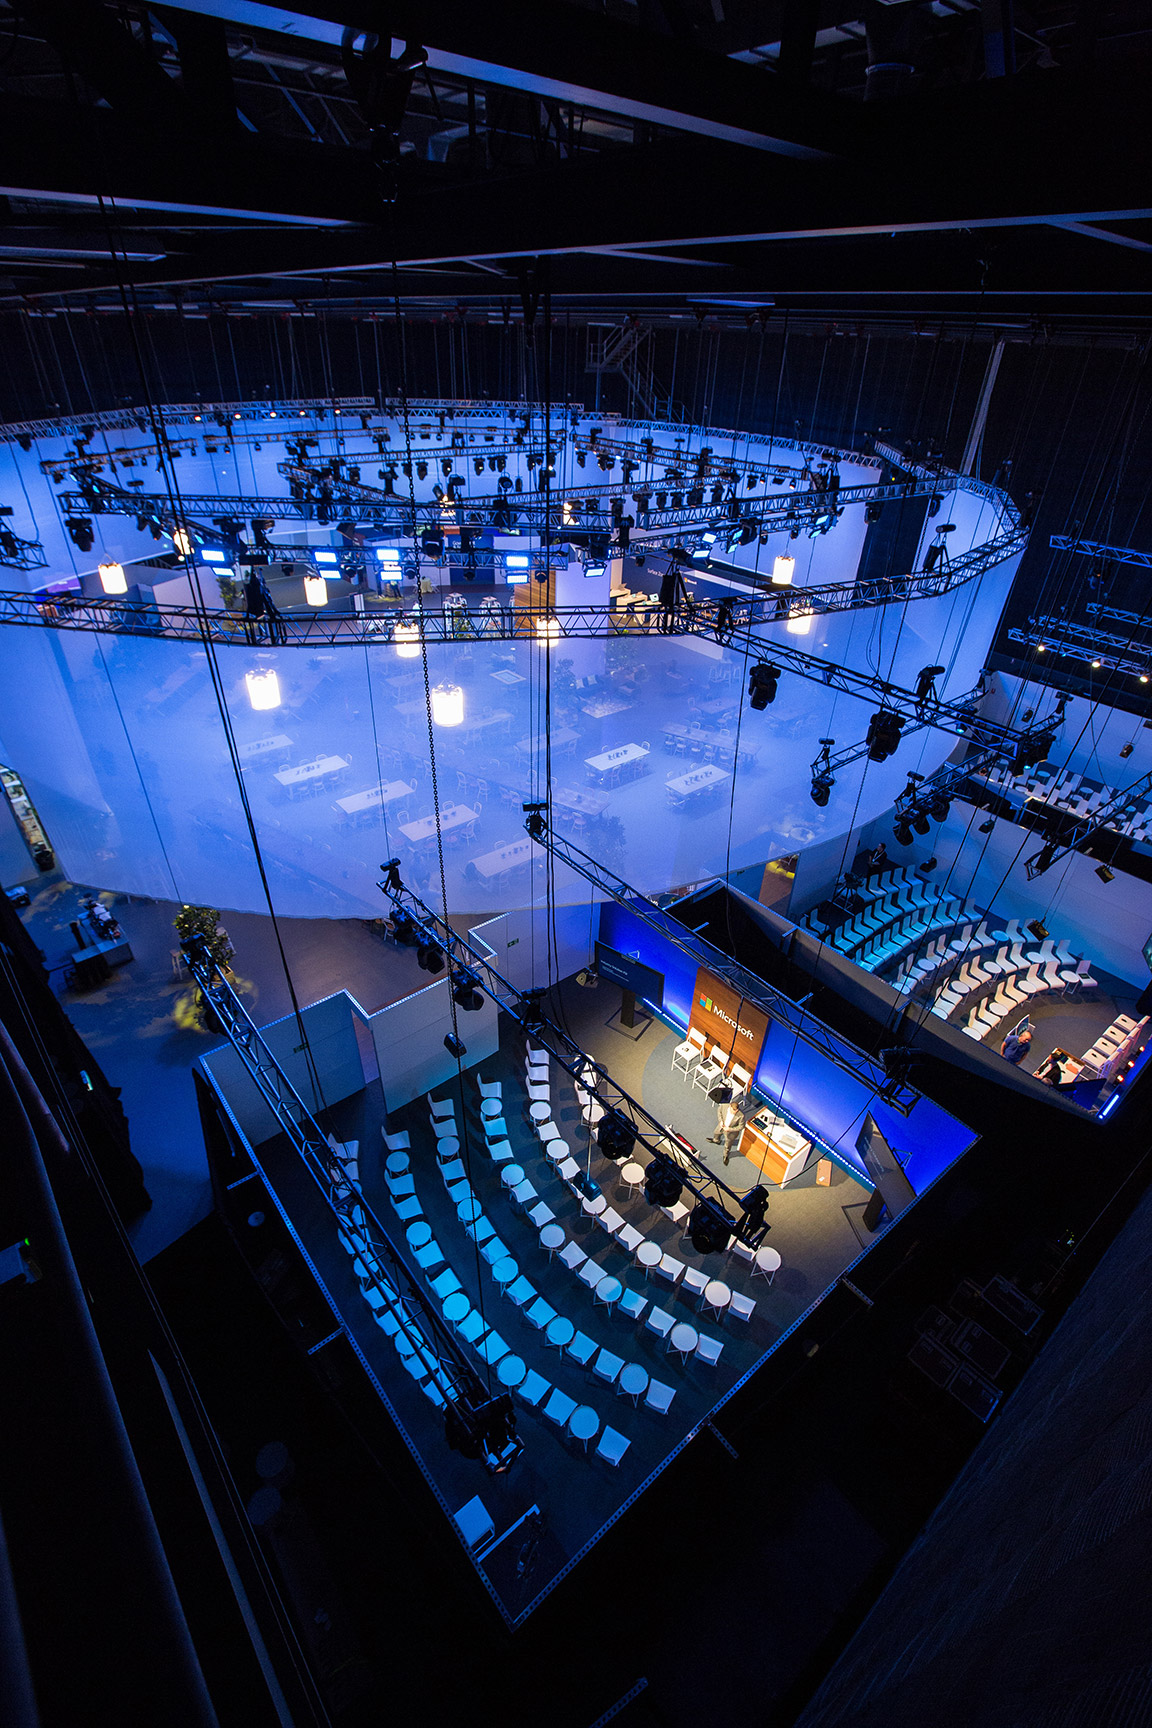 Birds eye view of convention center setup for Microsoft's Business Forward event in Australia.